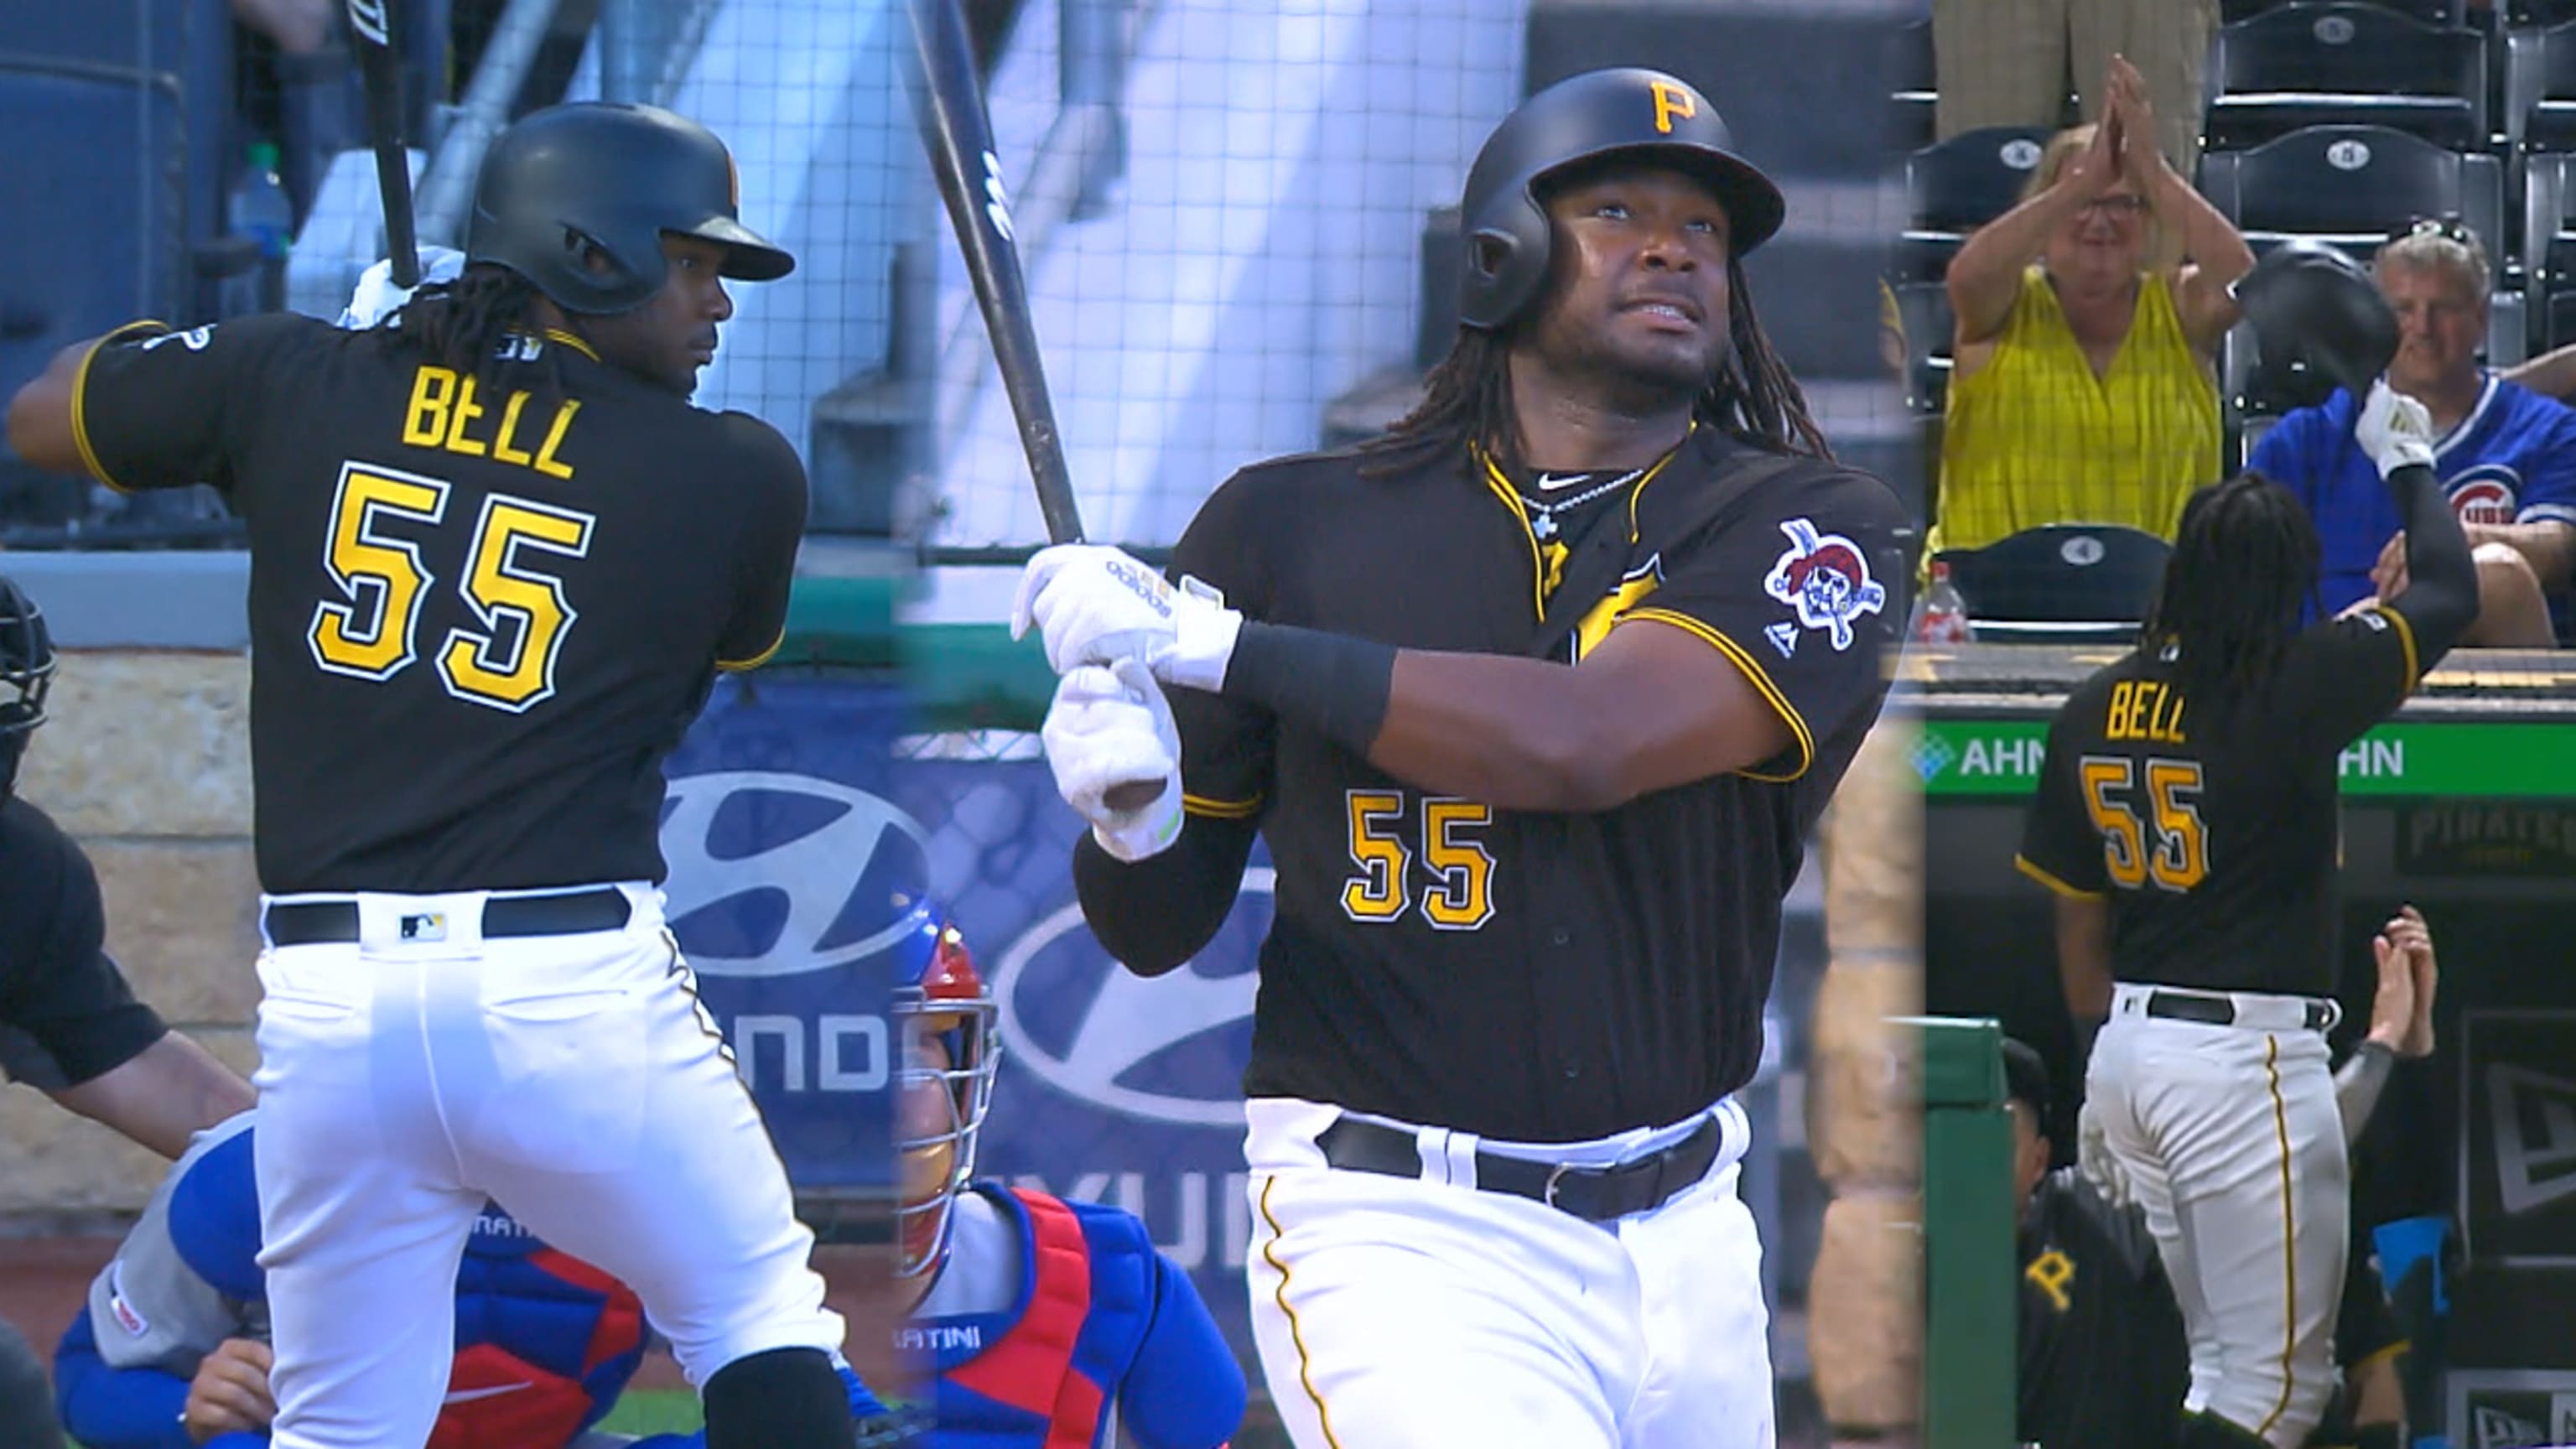 PNC Park's top 20 Pirates moments, part 1: Cutch's first walk-off homer,  Bell's slam, Harrison's no-no-buster - The Athletic